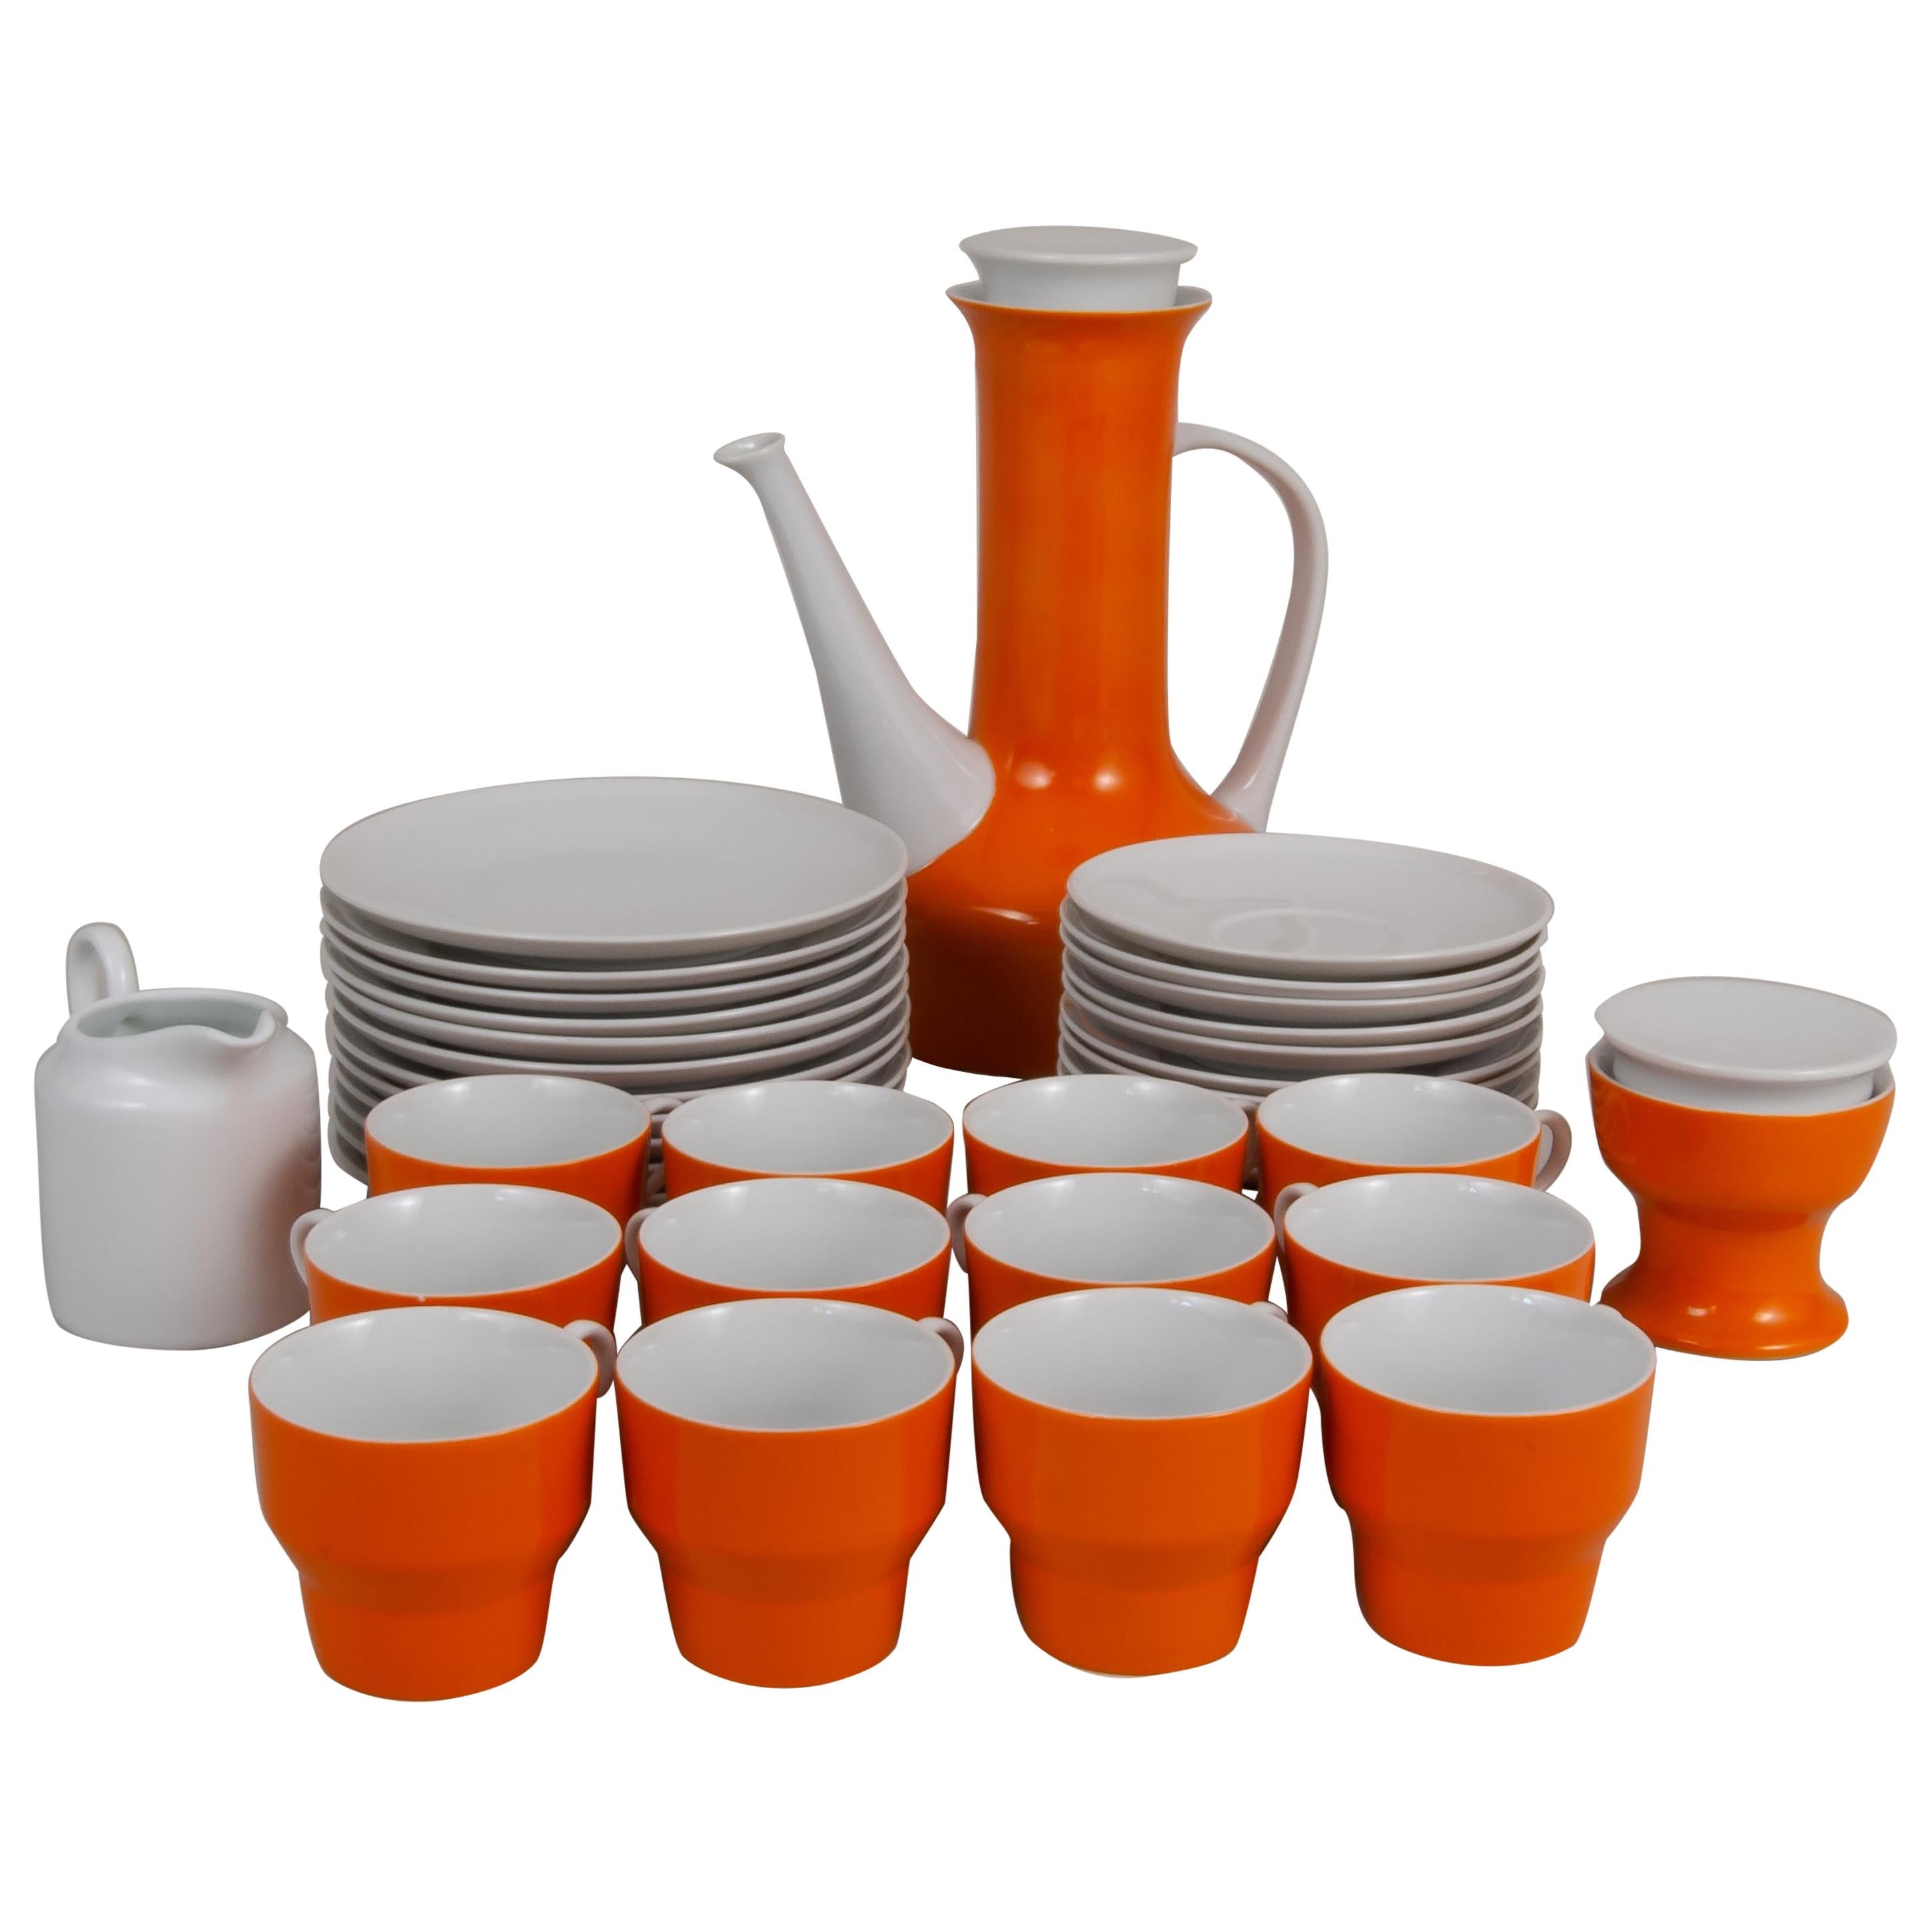 Paul McCobb for Contempi, Japan 38 Piece Ceramic Coffee Set in Orange and White For Sale